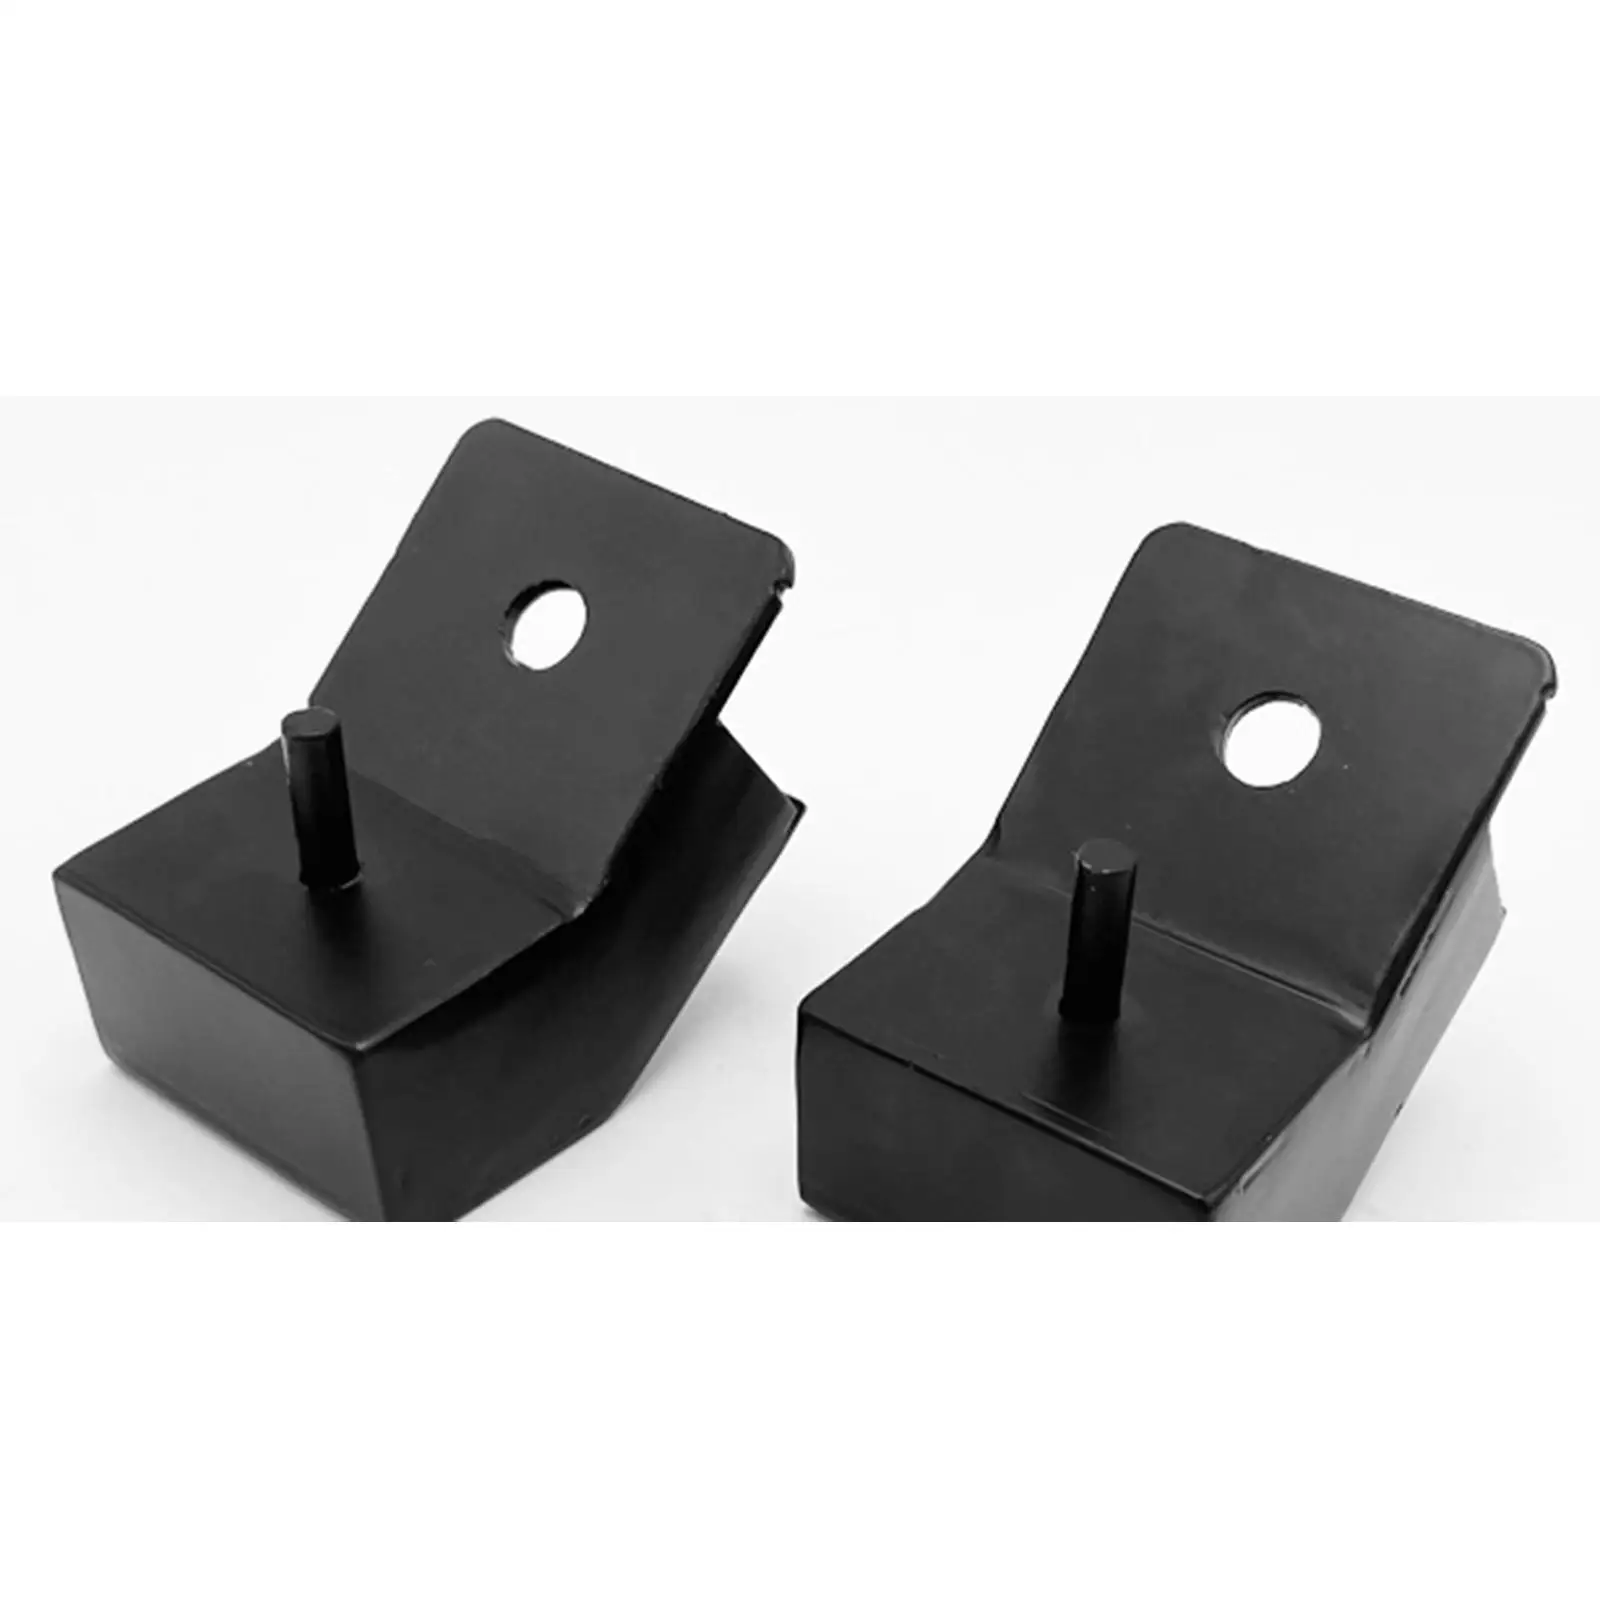 Front Seat Jackers Riser Front Seat Cushion Kit Car Accessories High Performance Front Seat Spacers Jackers Kit for Gx470